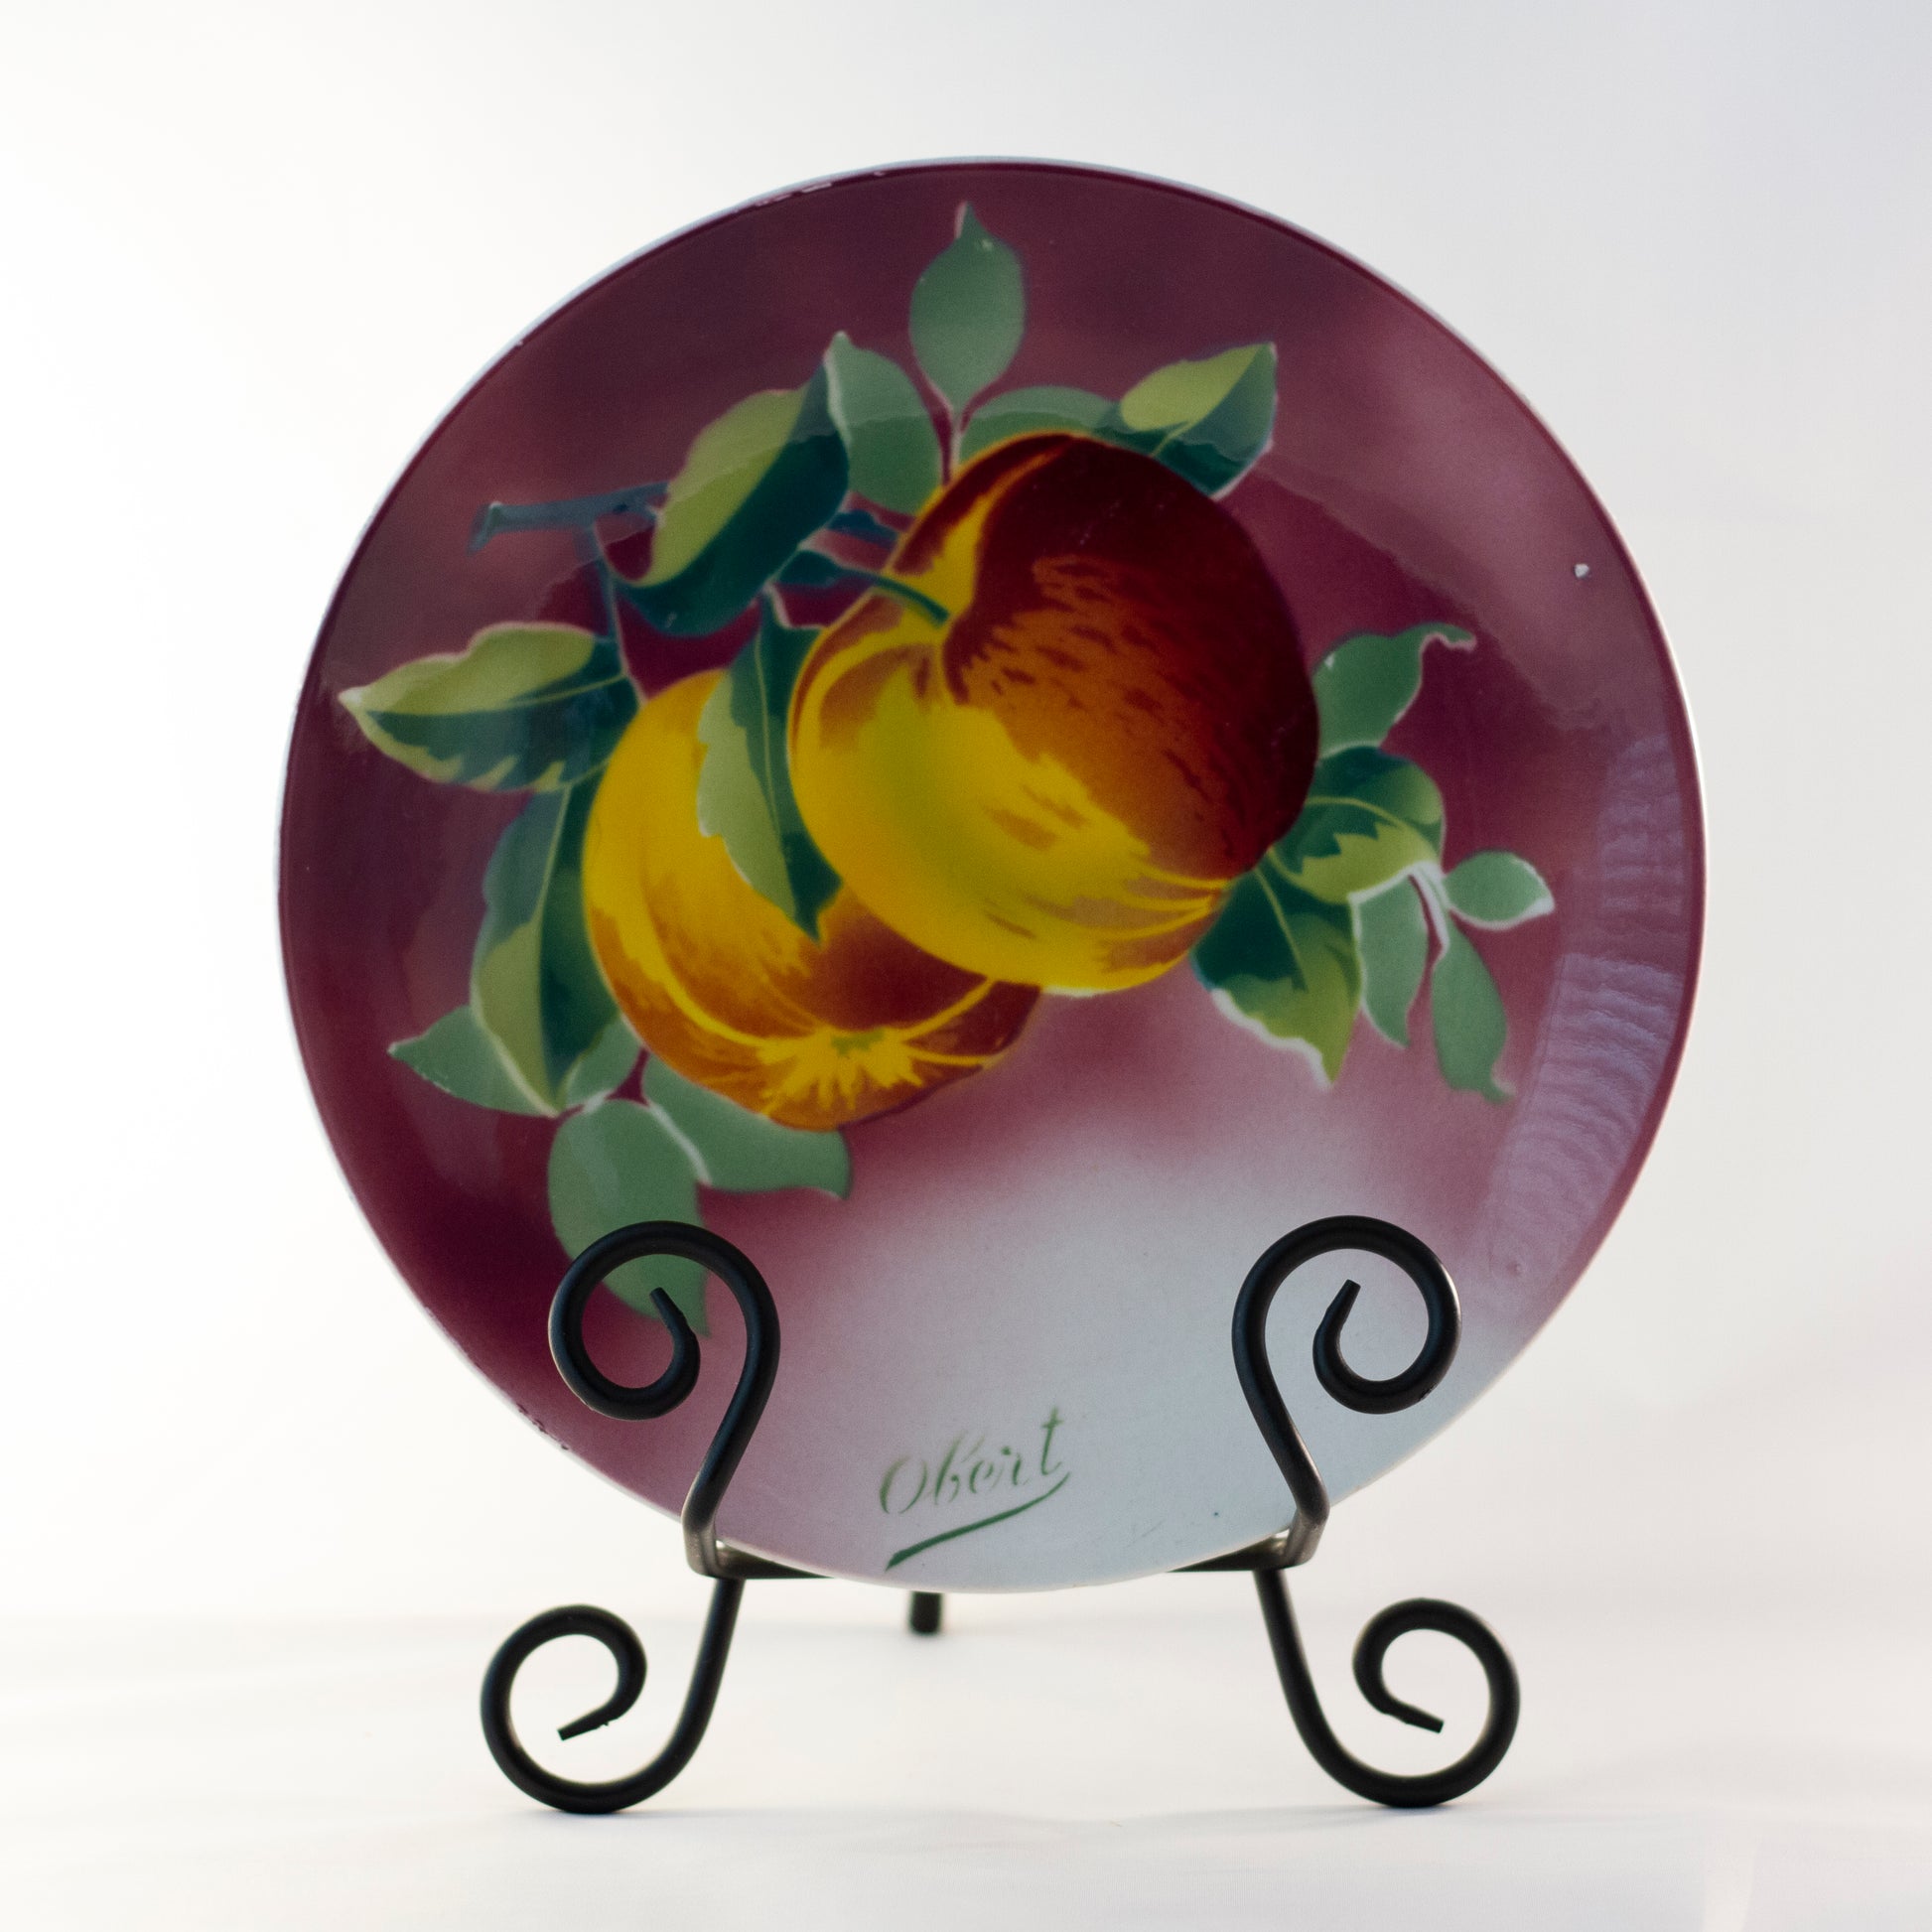 K & G LUNÉVILLE FRENCH FAIENCE PLATE HAND PAINTED APPLES 8 ½” Signed Obert Circa 1900